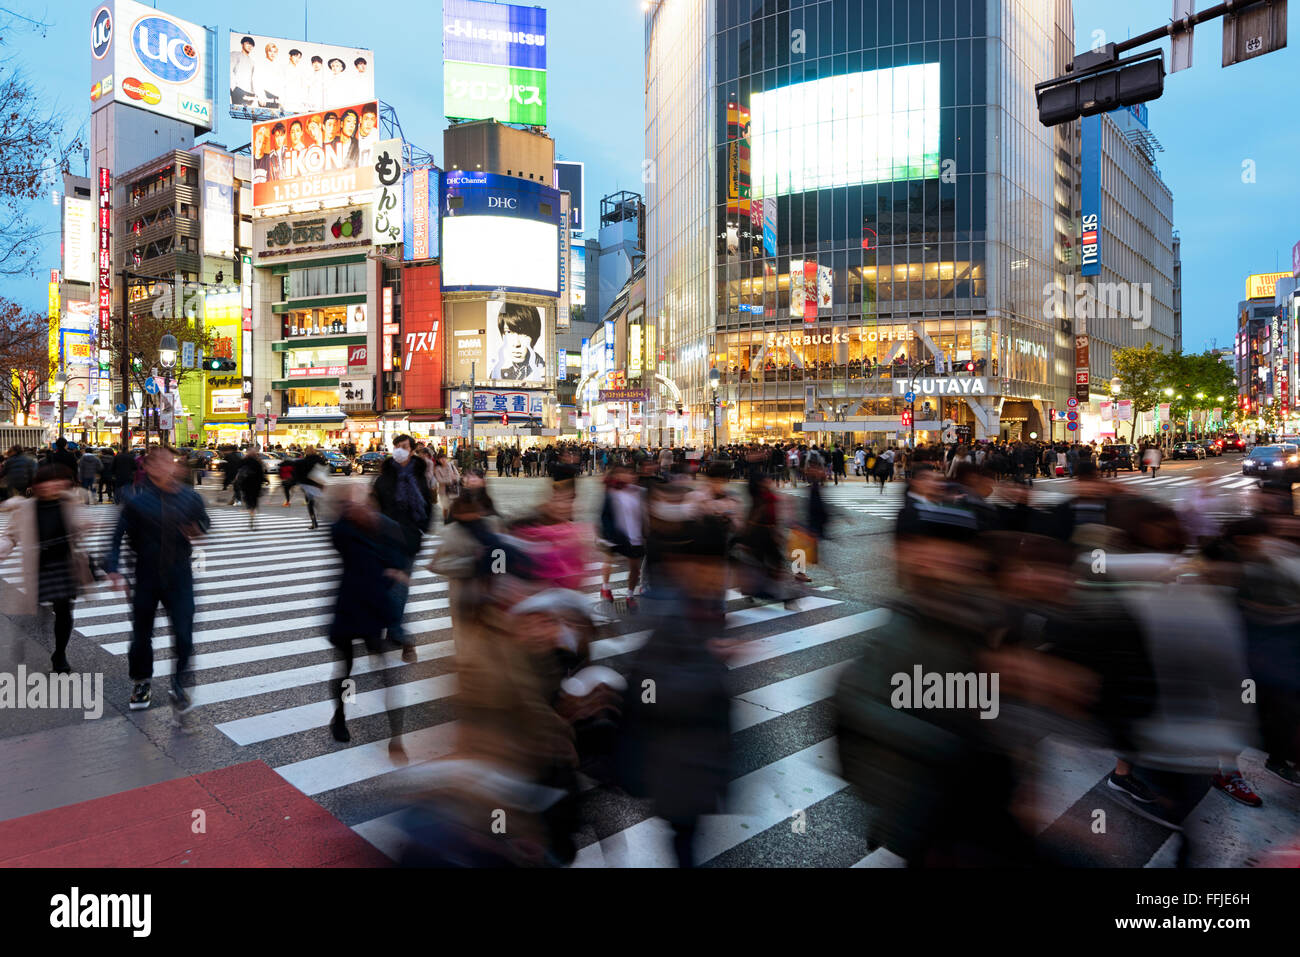 Tokyo, Japan - January 17, 2016: Evening rush hour at the famous Shibuya Crossing in Tokyo, Japan. Stock Photo